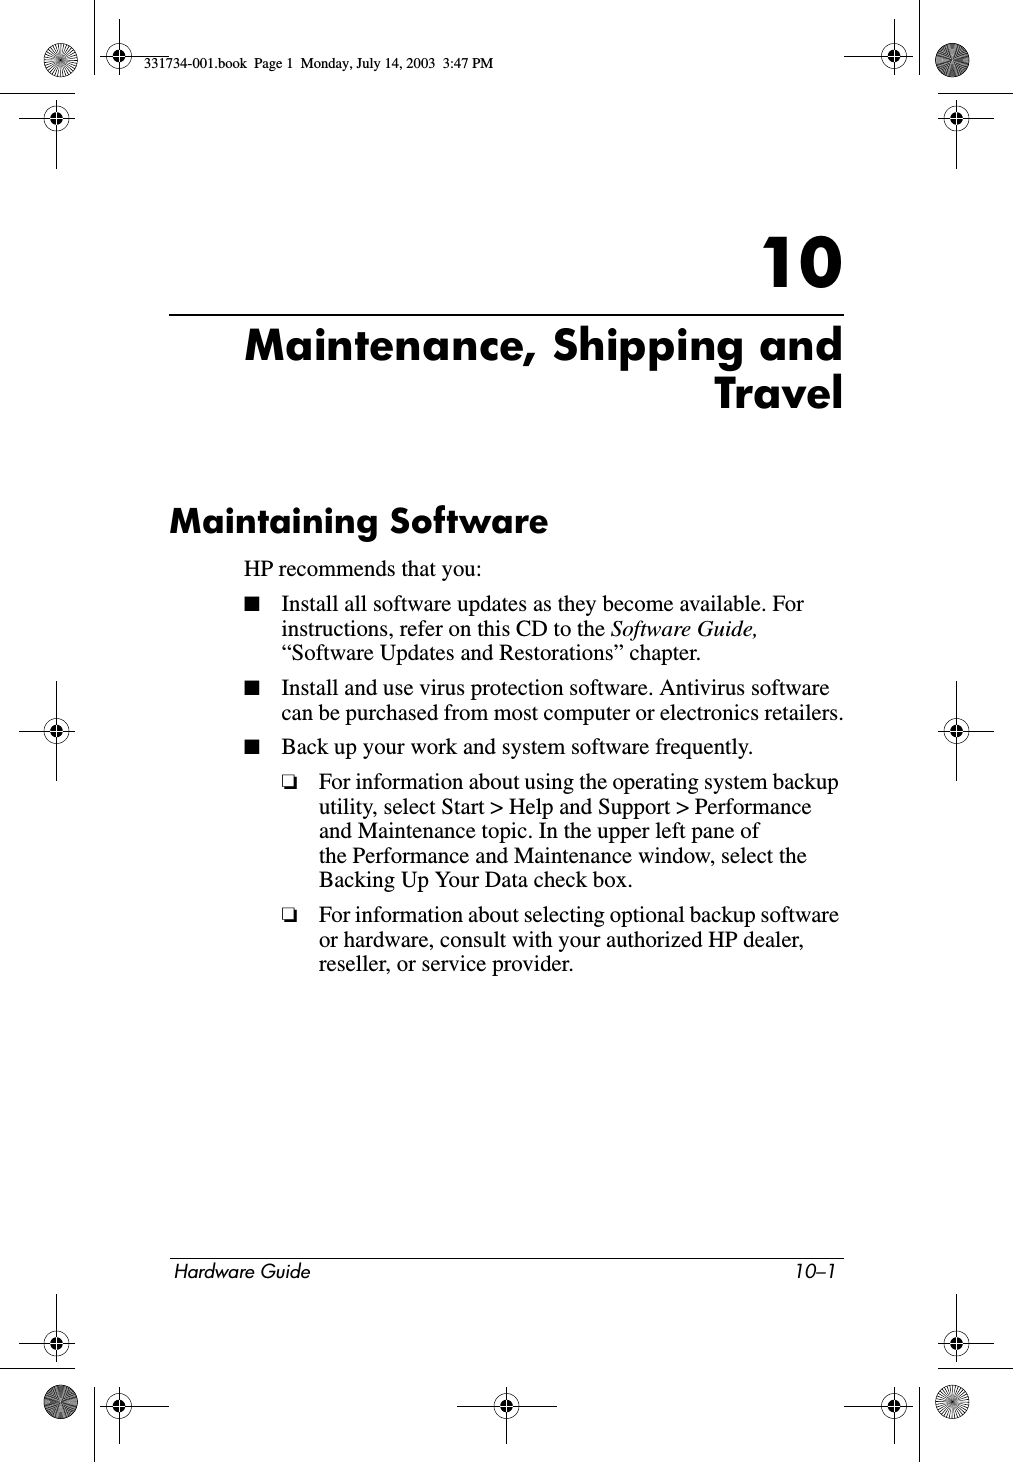 Hardware Guide 10–110Maintenance, Shipping andTravelMaintaining SoftwareHP recommends that you:■Install all software updates as they become available. For instructions, refer on this CD to the Software Guide, “Software Updates and Restorations” chapter.■Install and use virus protection software. Antivirus software can be purchased from most computer or electronics retailers.■Back up your work and system software frequently.❏For information about using the operating system backup utility, select Start &gt; Help and Support &gt; Performance and Maintenance topic. In the upper left pane of the Performance and Maintenance window, select the Backing Up Your Data check box.❏For information about selecting optional backup software or hardware, consult with your authorized HP dealer, reseller, or service provider.331734-001.book  Page 1  Monday, July 14, 2003  3:47 PM